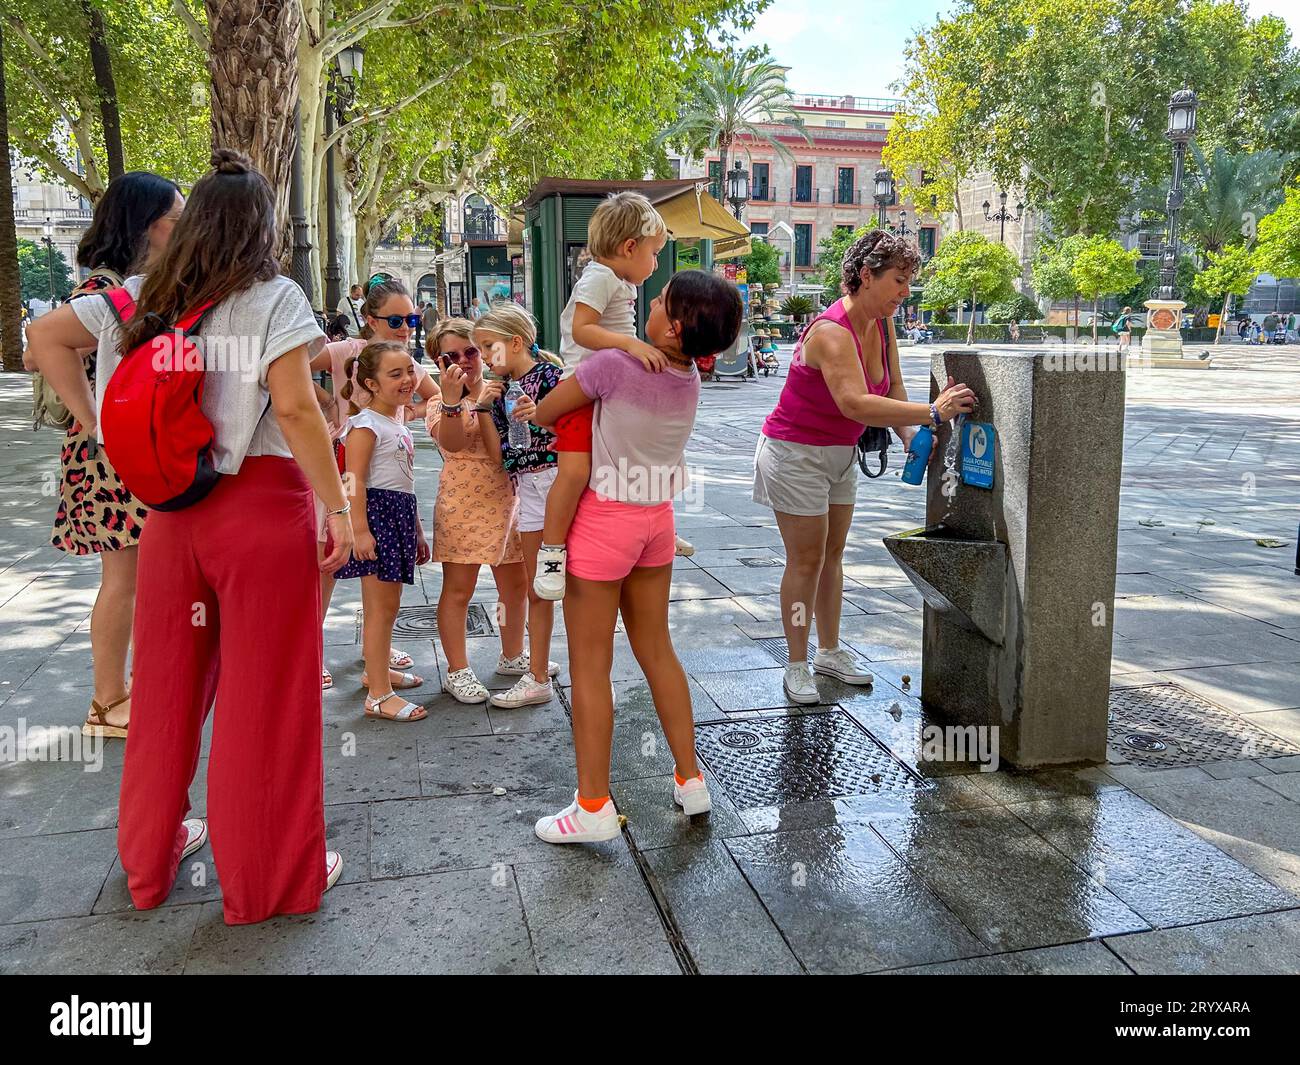 Seville, Spain, Large Crowd People, Family with Children, Drinking Water on Hot Day, Heat Wave on Street Scene, in Old Town Center, Stock Photo